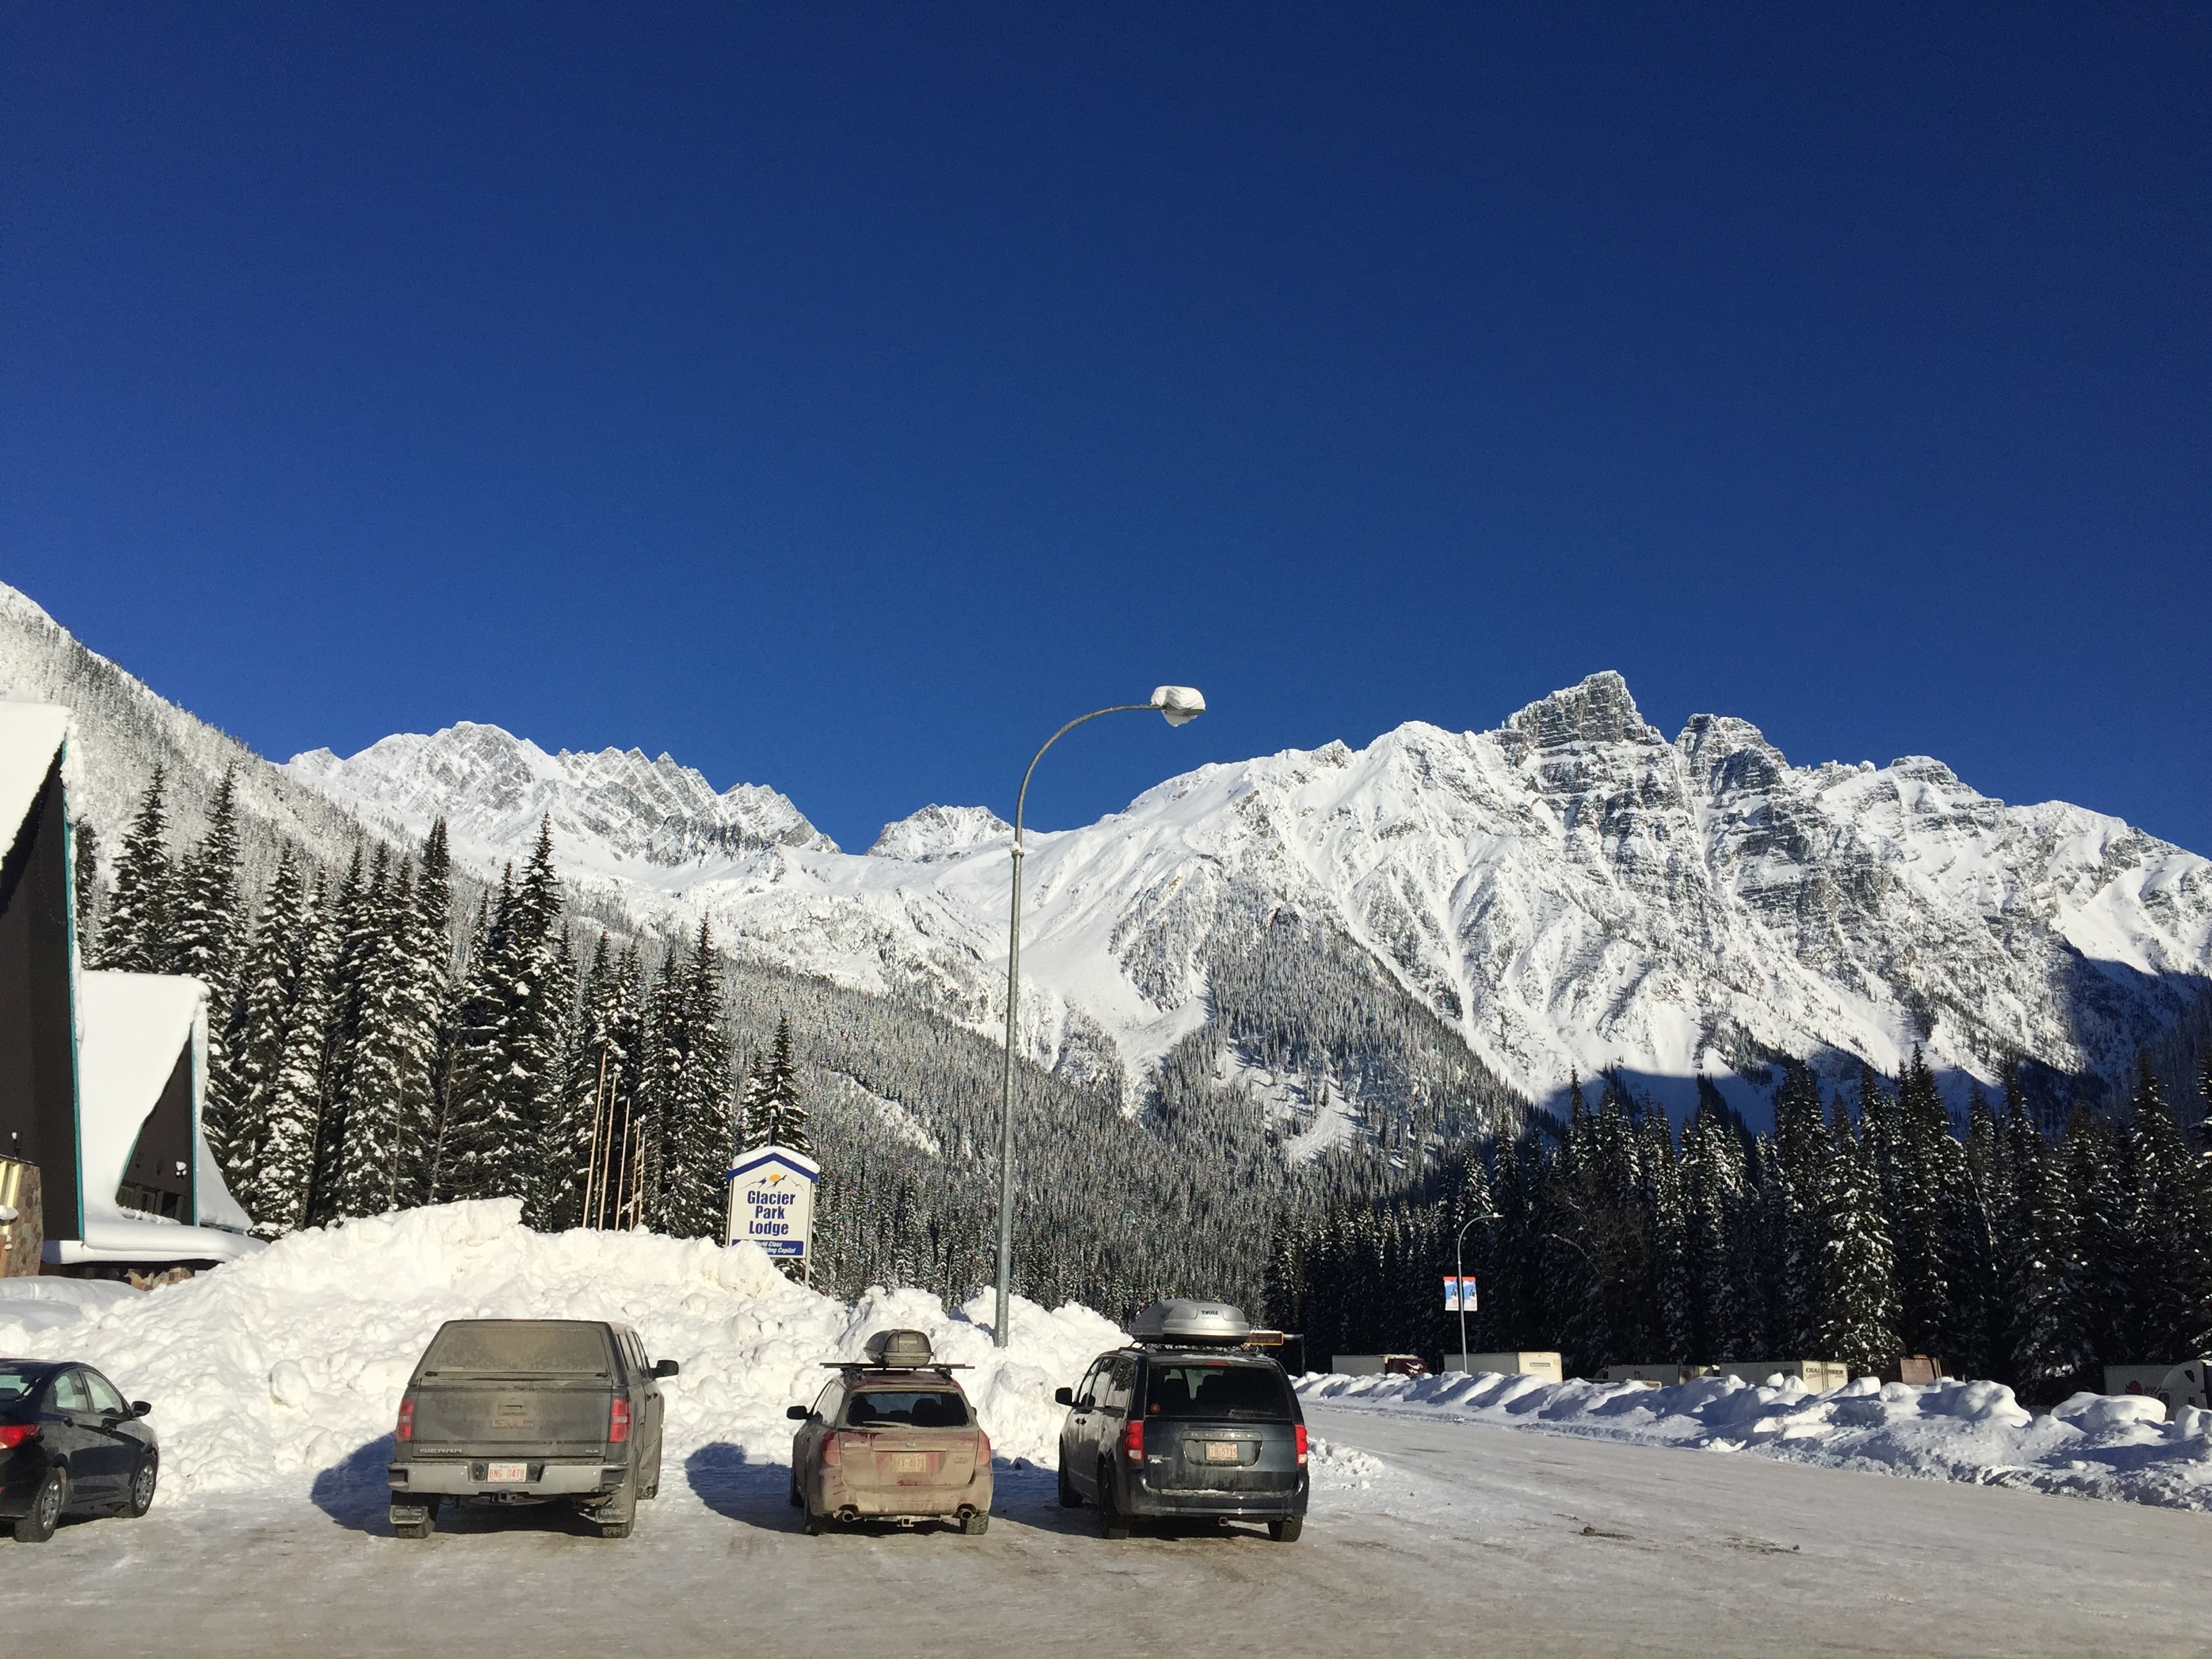 Swiss Peaks and Rogers in the Hermit section of Rogers Pass, as seen from the Discovery Center Parking Lot. Photo: Sergei Poljak Jan. 3, 2017.